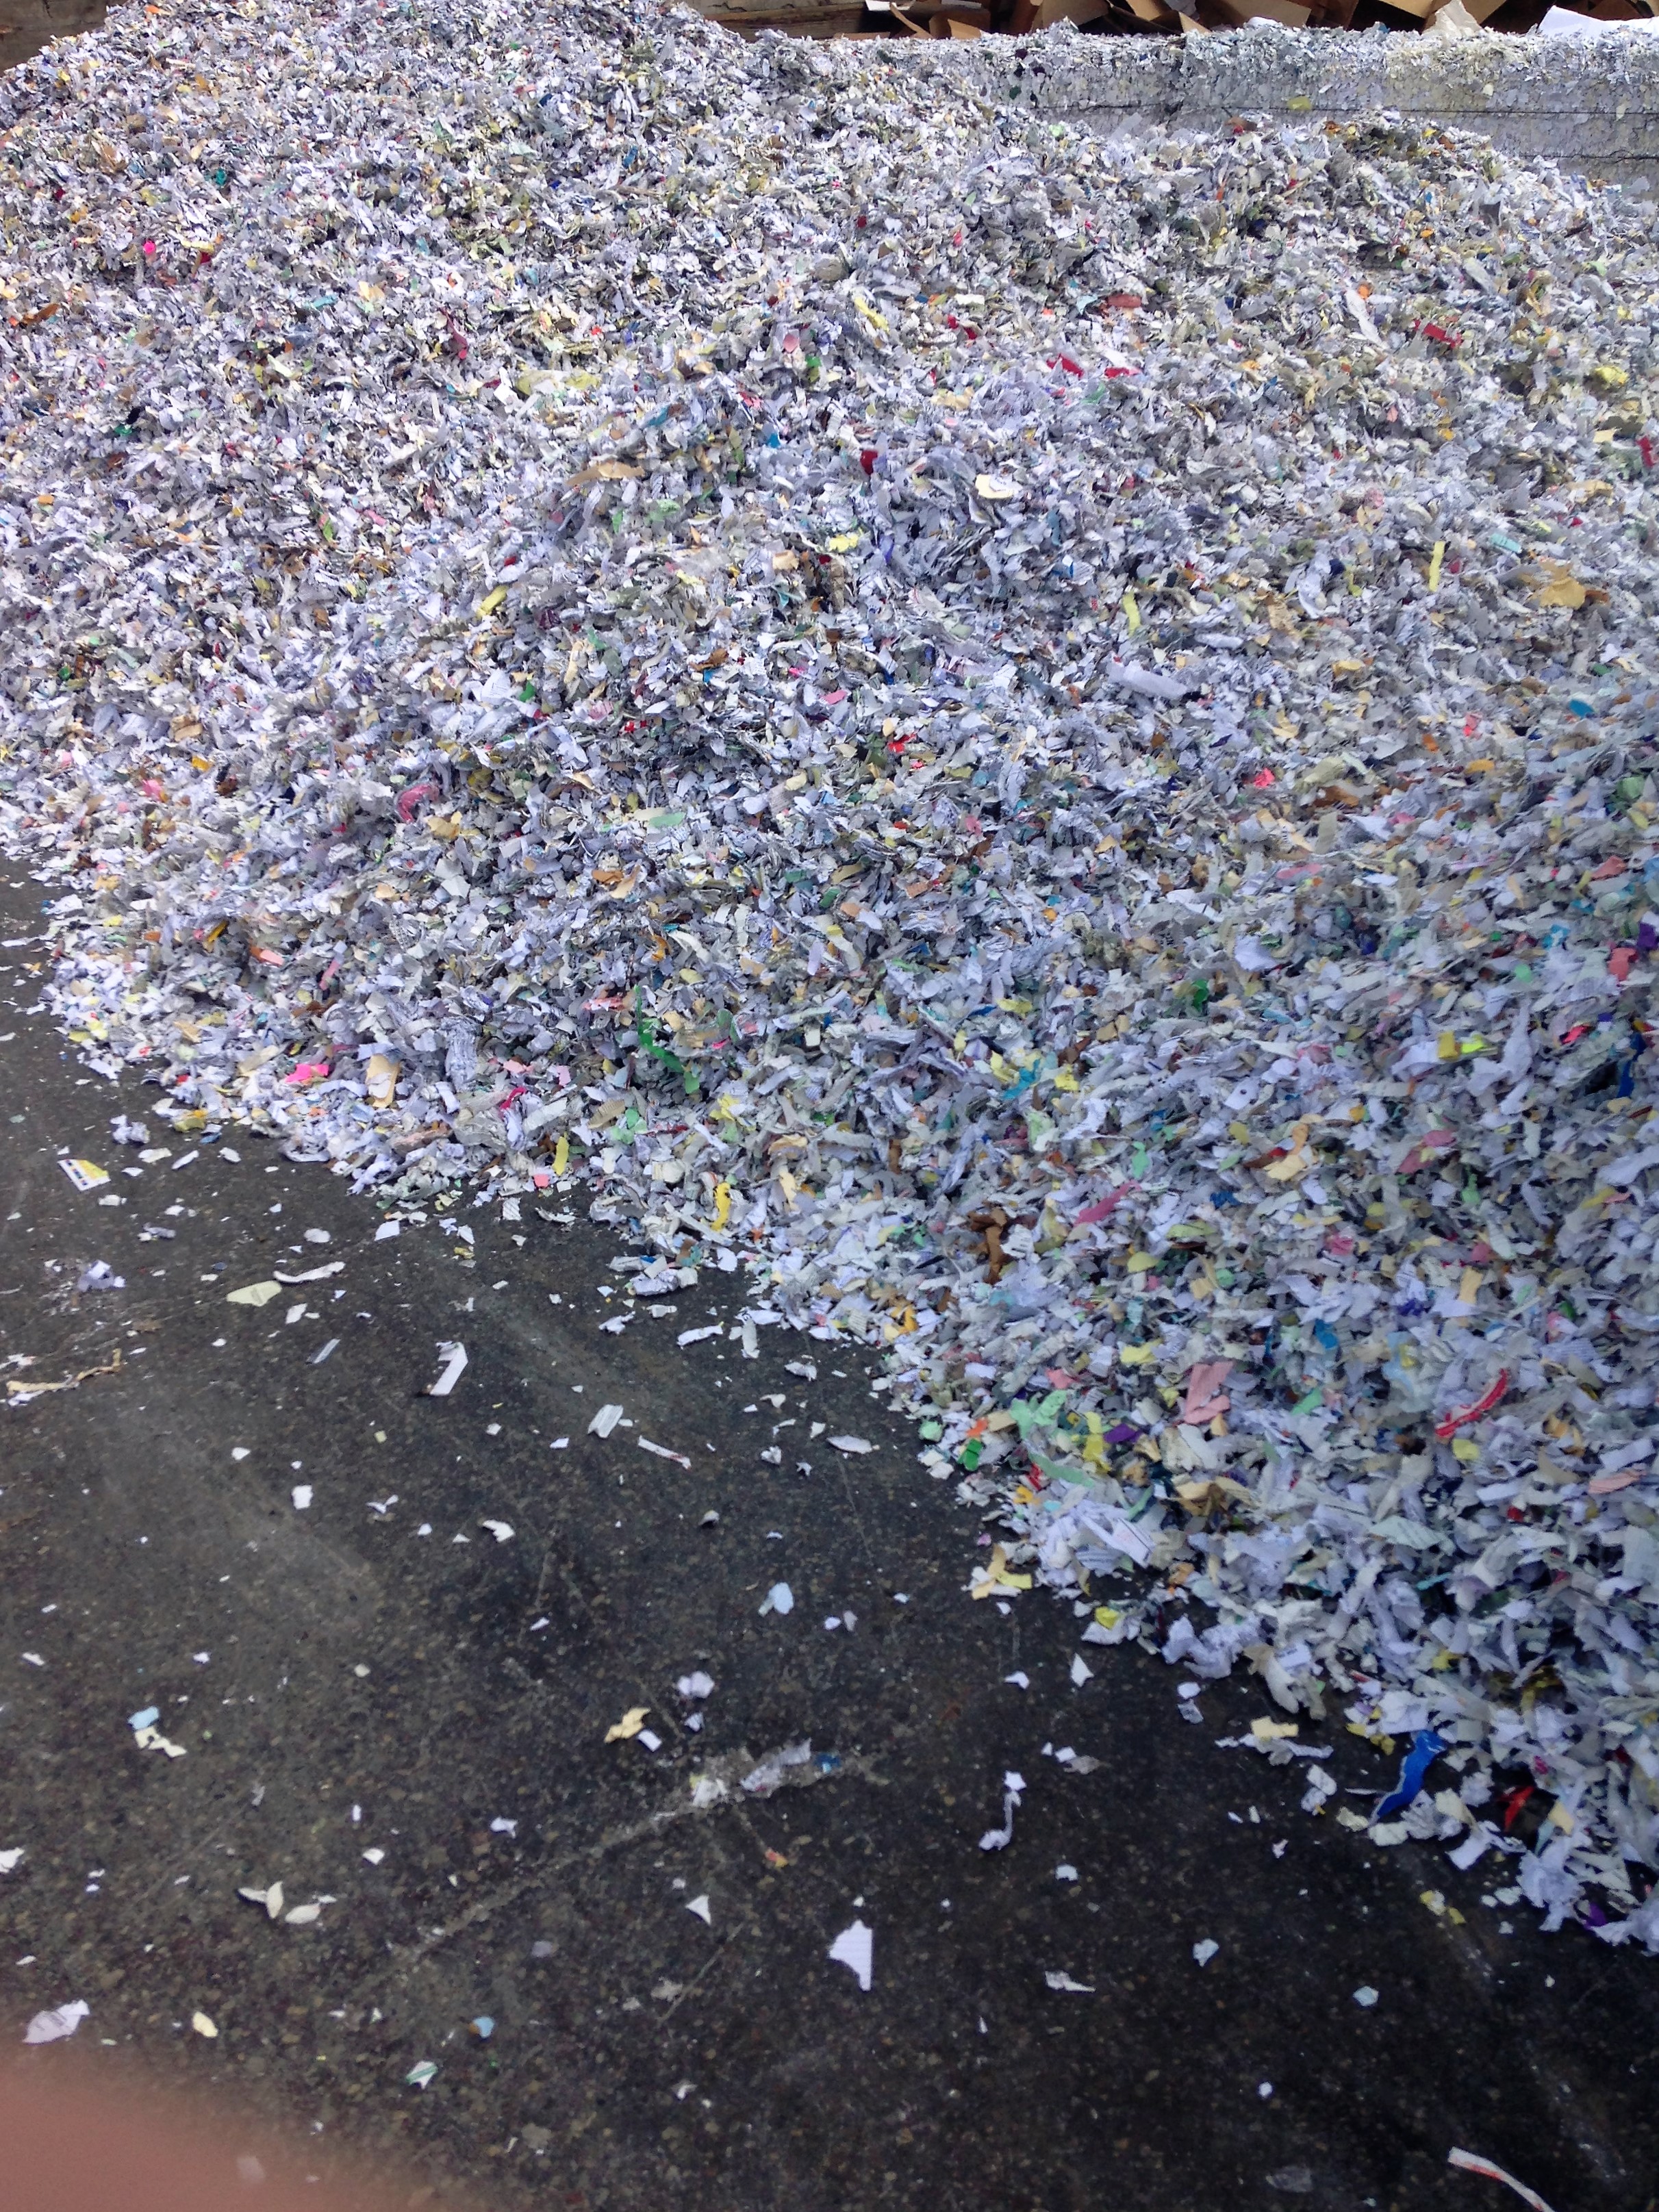 Securely Shredded Paper before It Gets Baled and Recycled